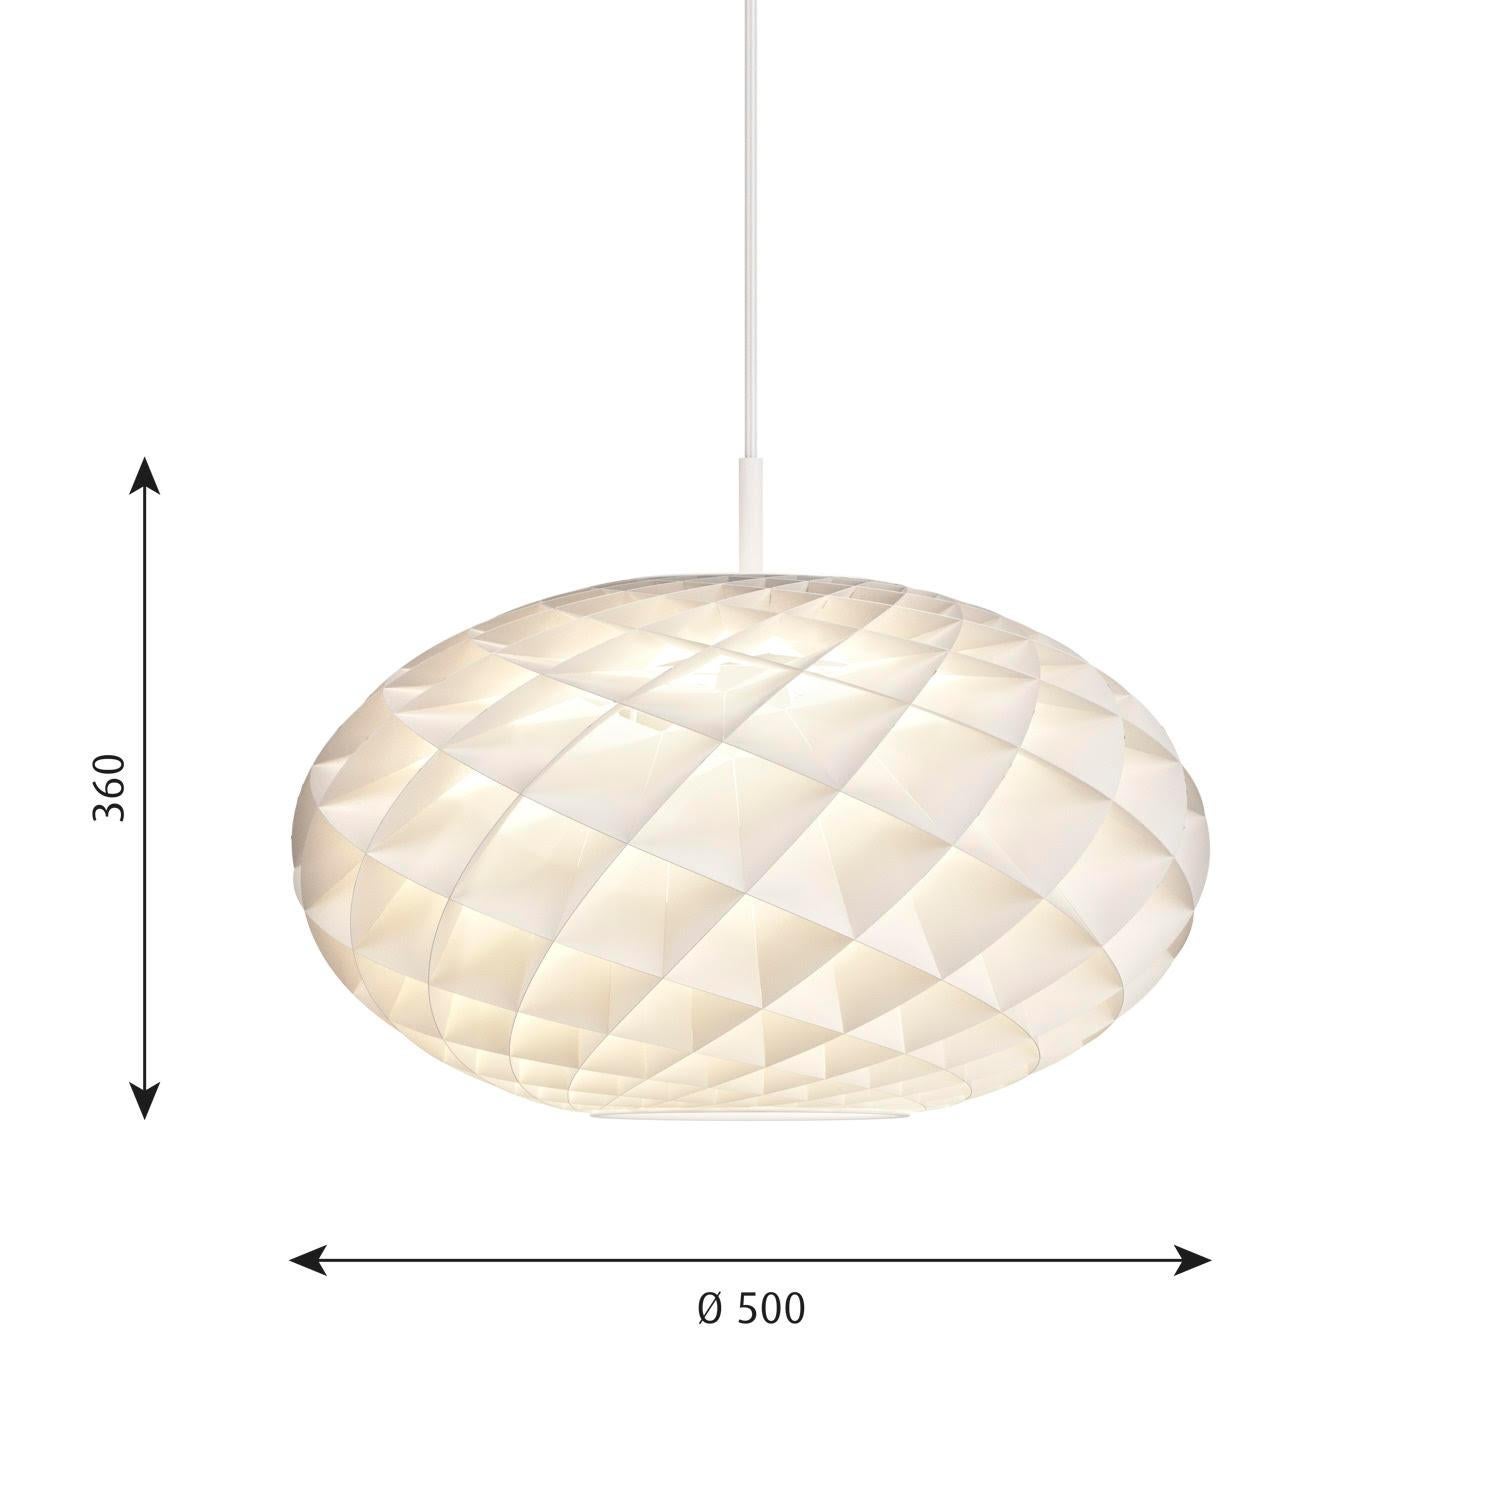 Patere Oval chandelier by Louis Poulsen

Patere modern chandelier by Louis Poulsen. 
Patera Oval is beautiful to look at from any angle, its structure based on the Fibonacci sequence offering a different impression depending on the point of